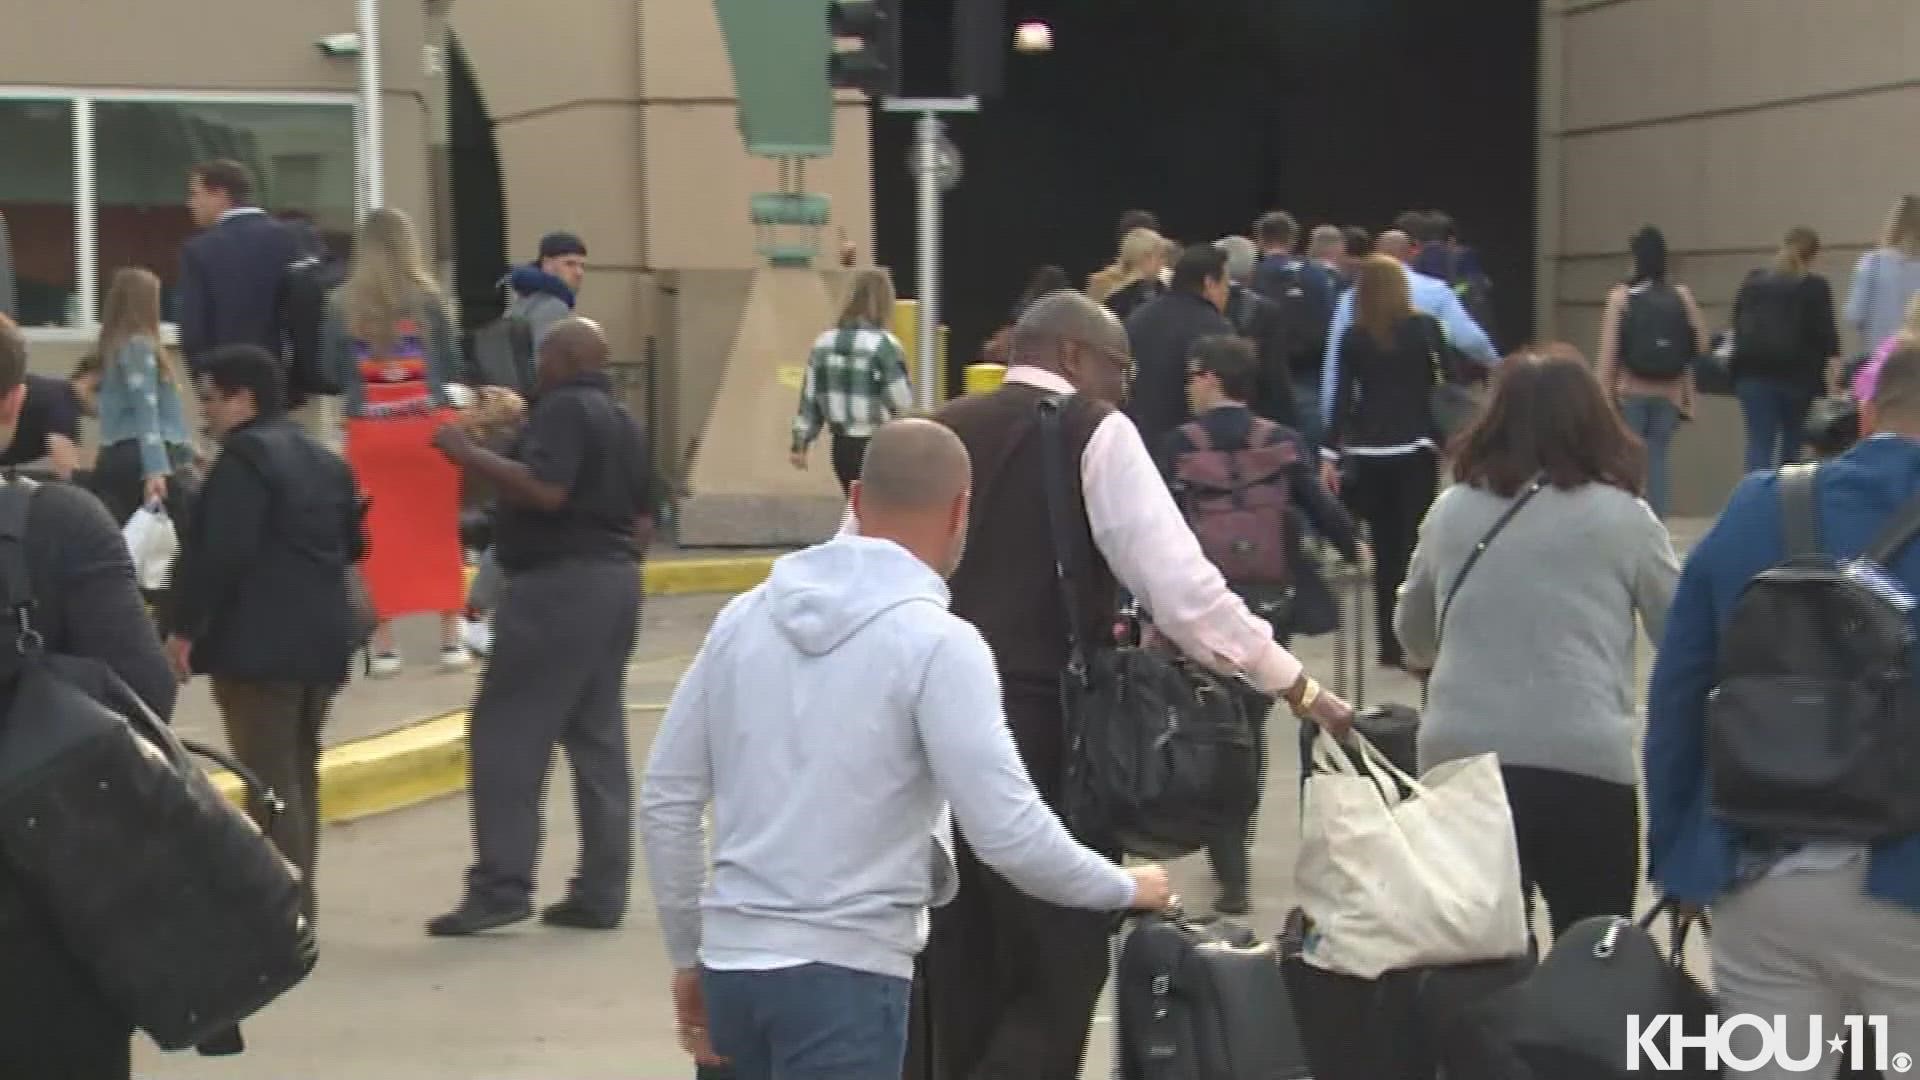 The Astros returned to Houston Friday, Nov. 4 where they will be finishing out the World Series against the Phillies.